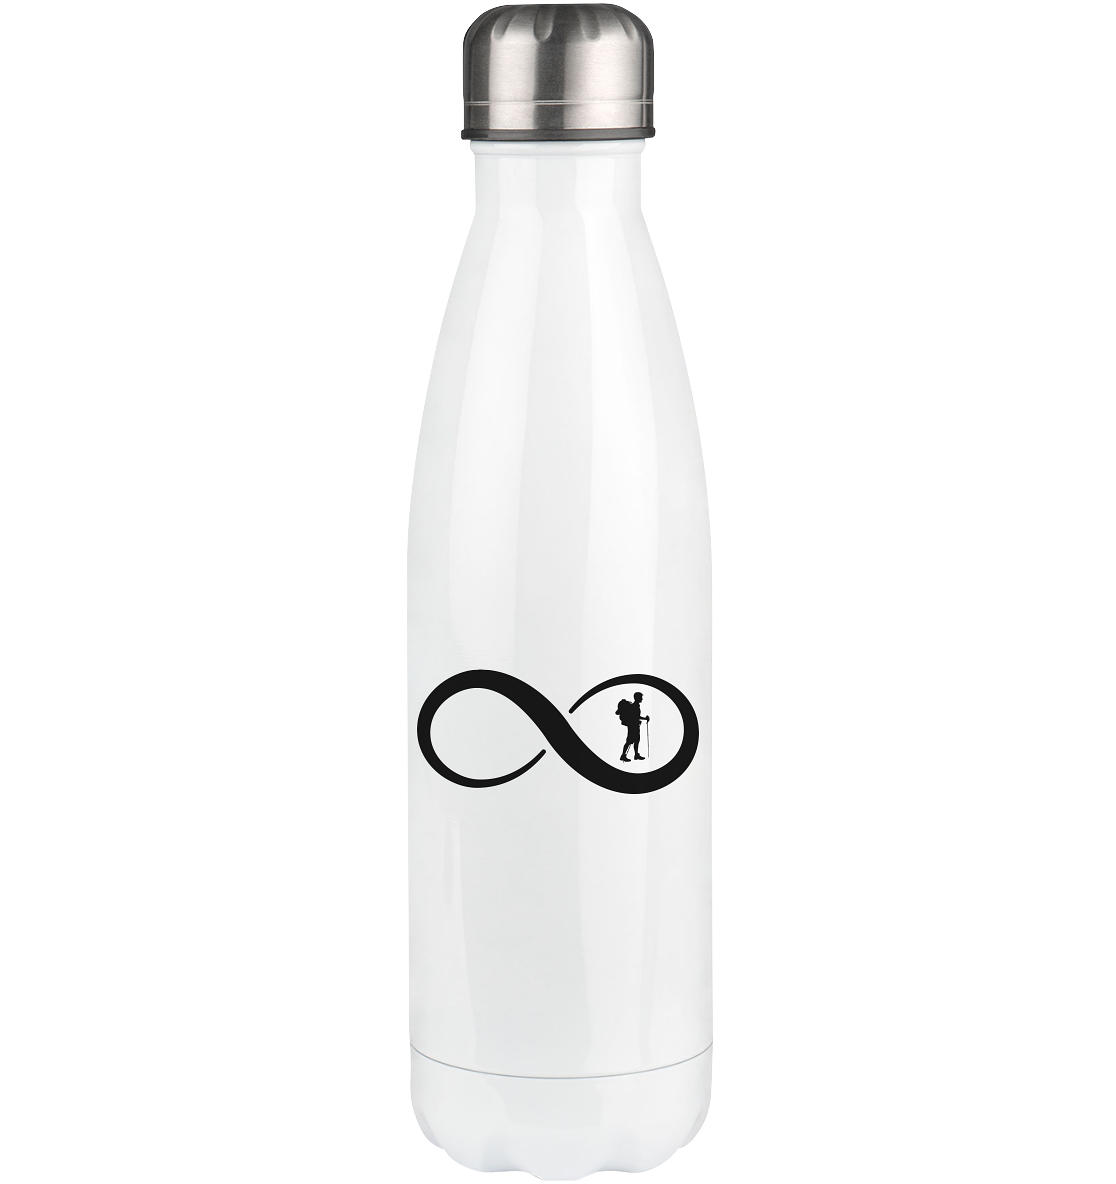 Infinity and Hiking - Edelstahl Thermosflasche wandern 500ml